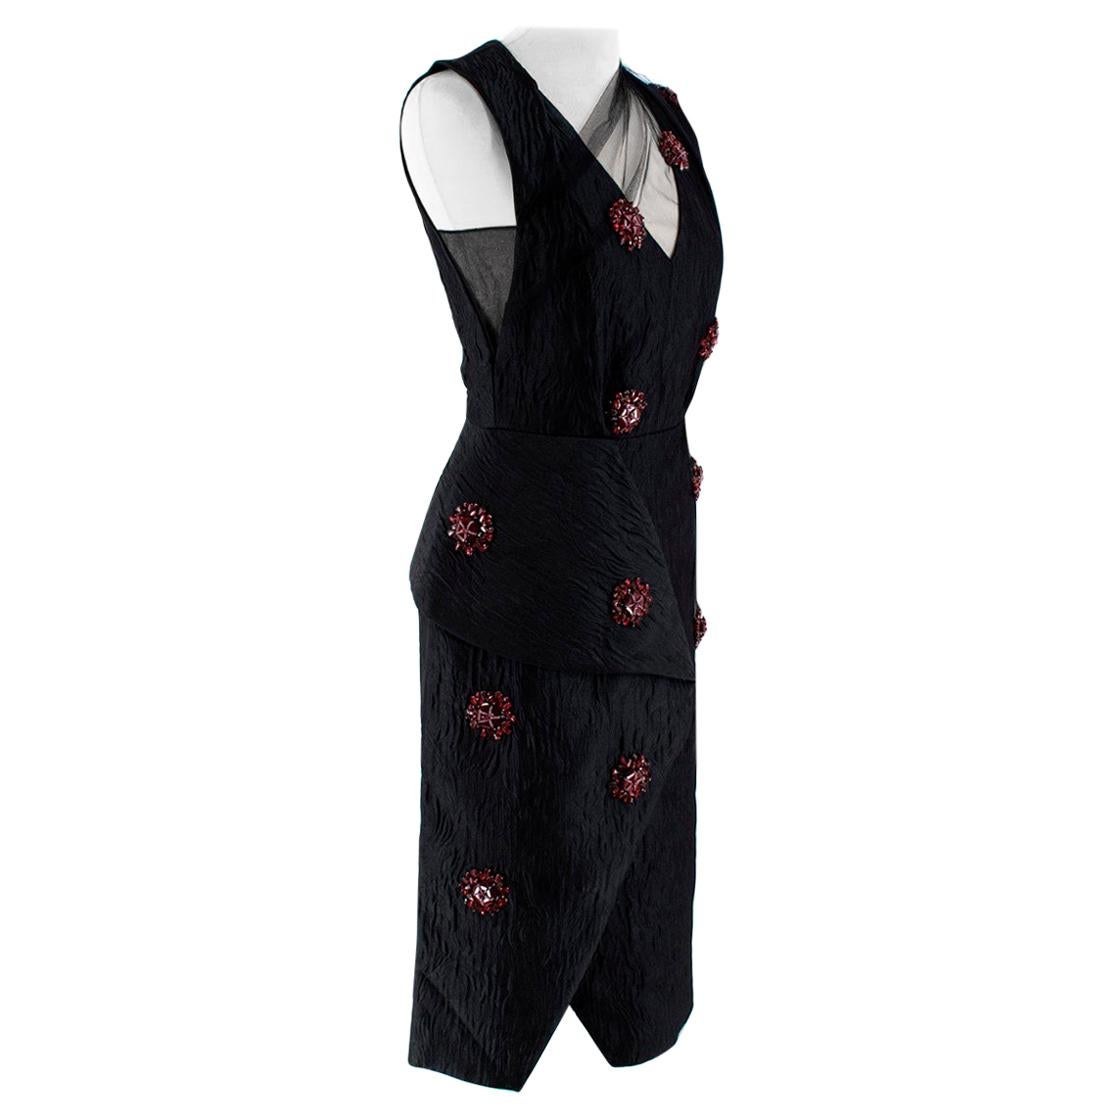 Erdem Black Embellished Dress

- Size 10

- V-neck with netting

- Red beaded embellishments

- Panel dress 
- Jacquard material with netting over the top
- Sleeveless dress with extra netting over the shoulders
Measurements are taken laying flat,